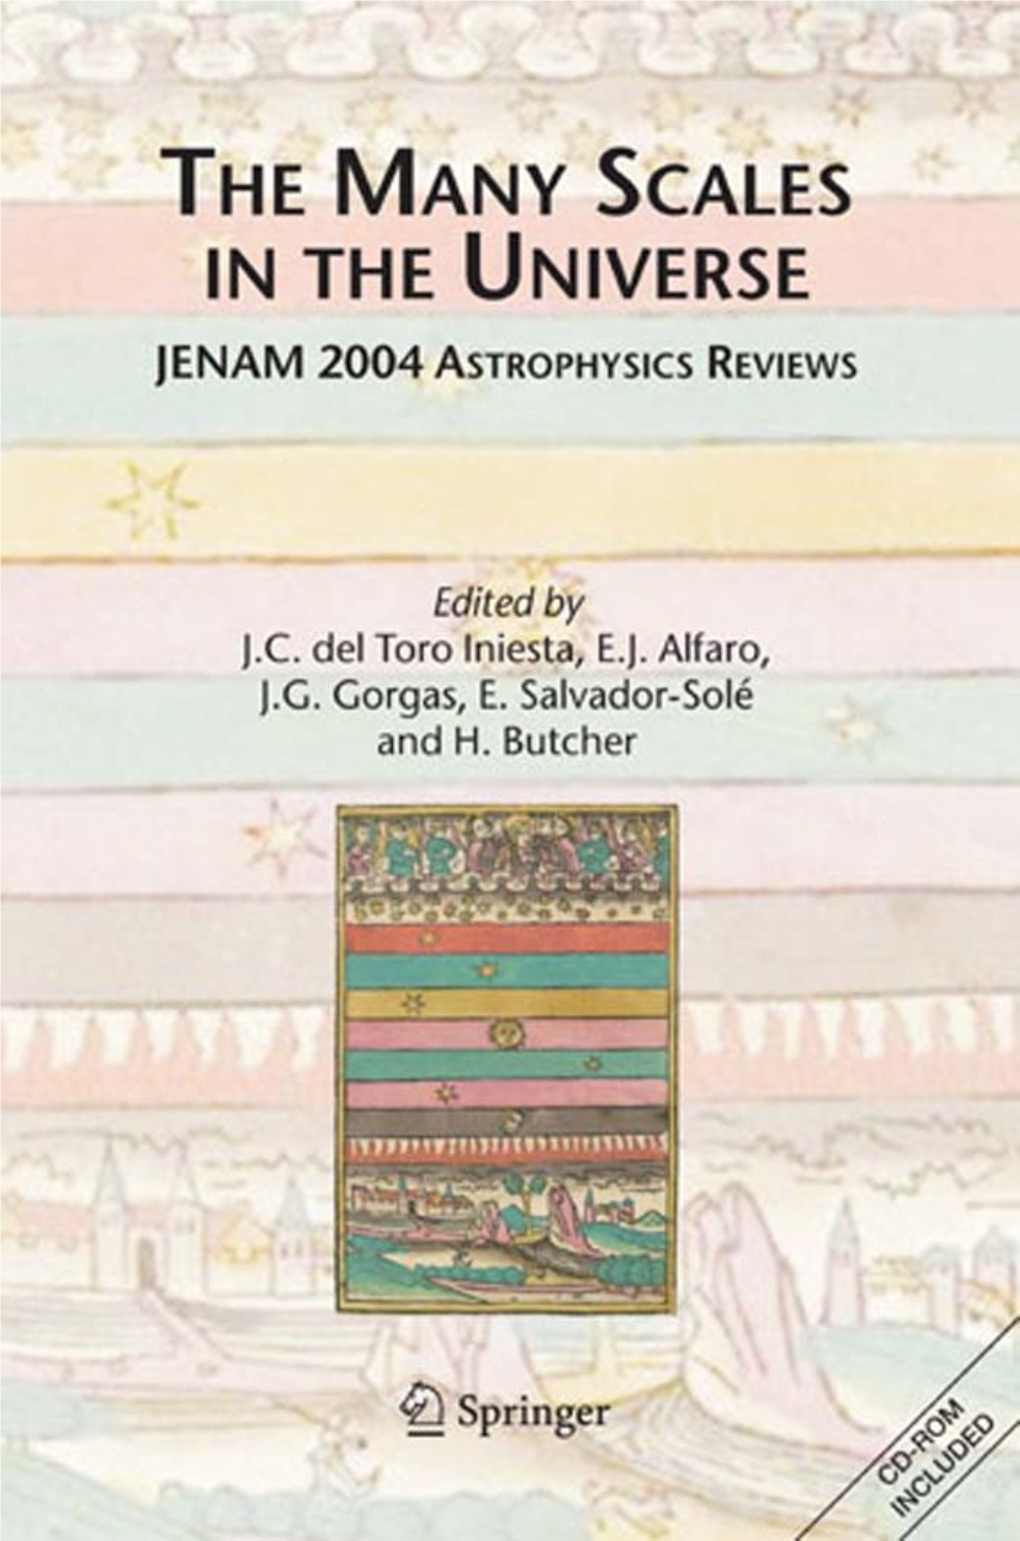 THE MANY SCALES in the UNIVERSE the Many Scales in the Universe JENAM 2004 Astrophysics Reviews